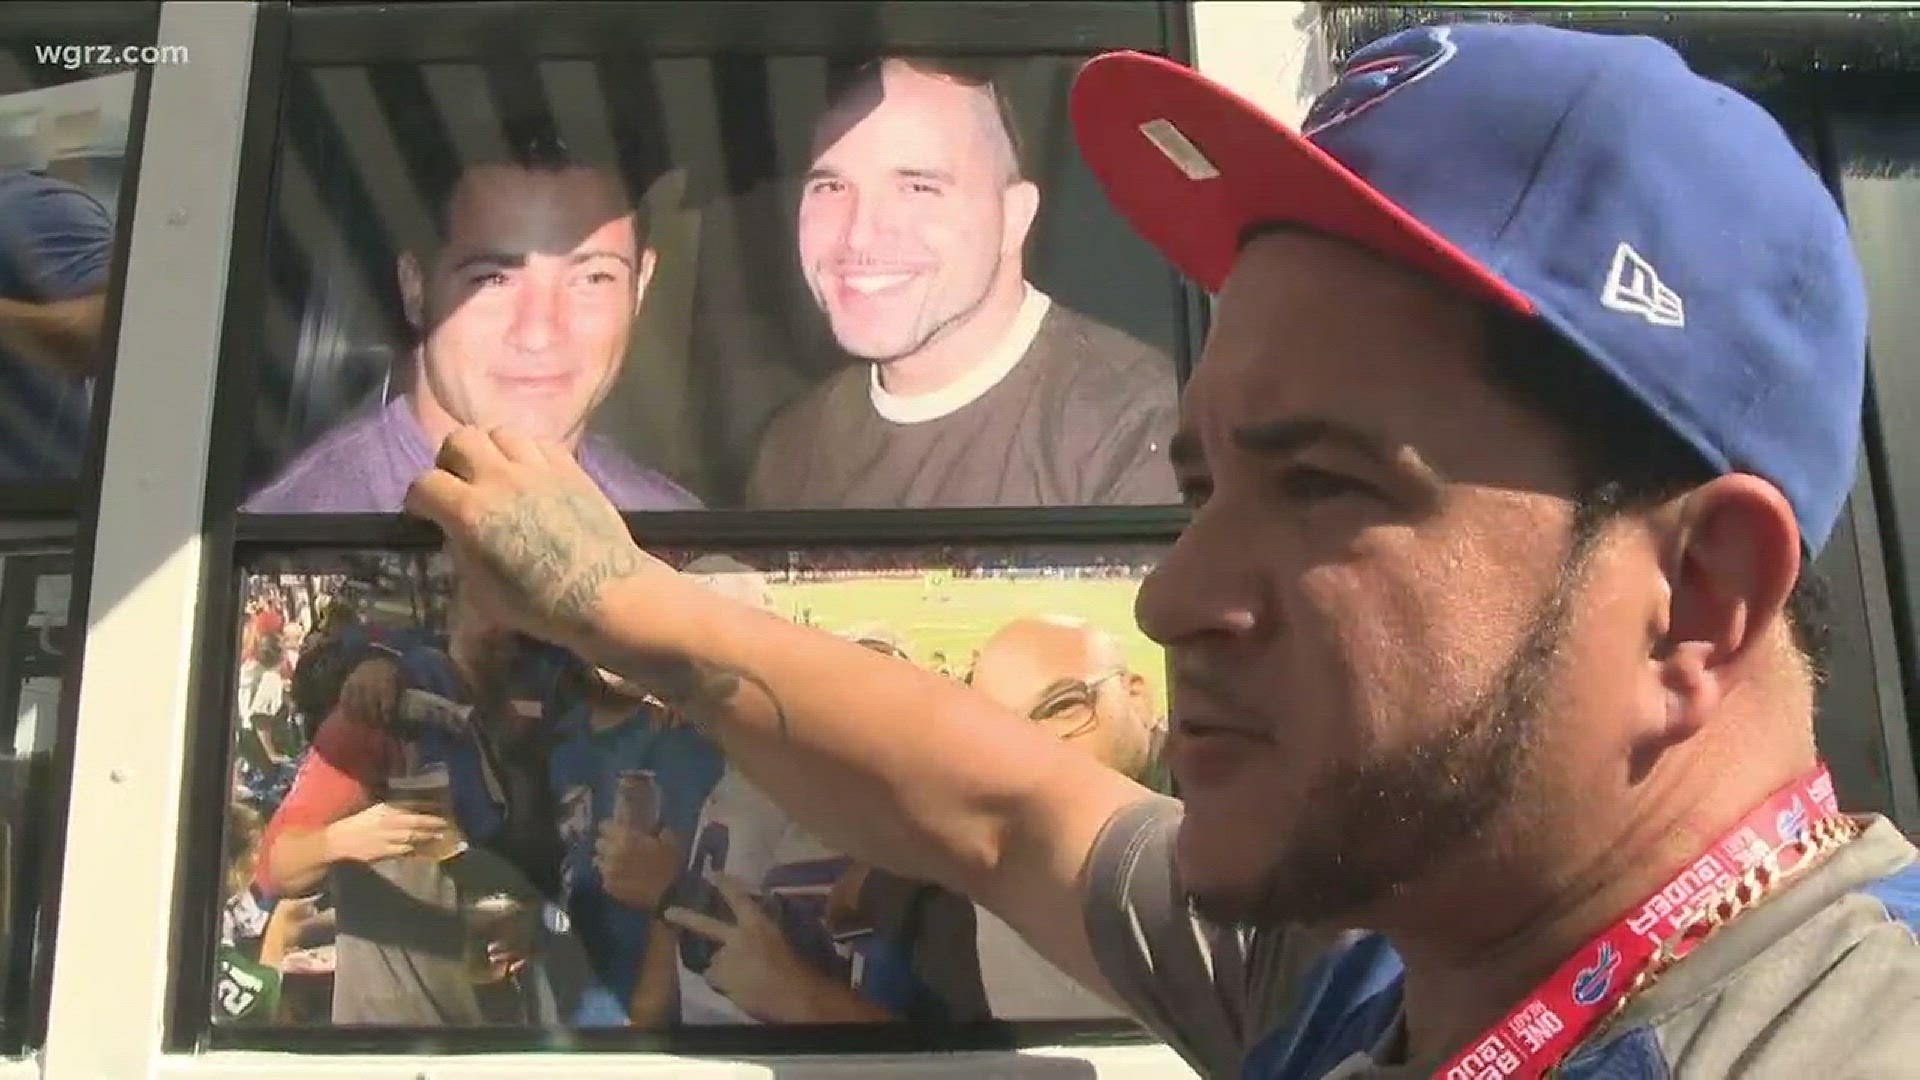 Bills fan keeps tradition alive after losing two brothers.